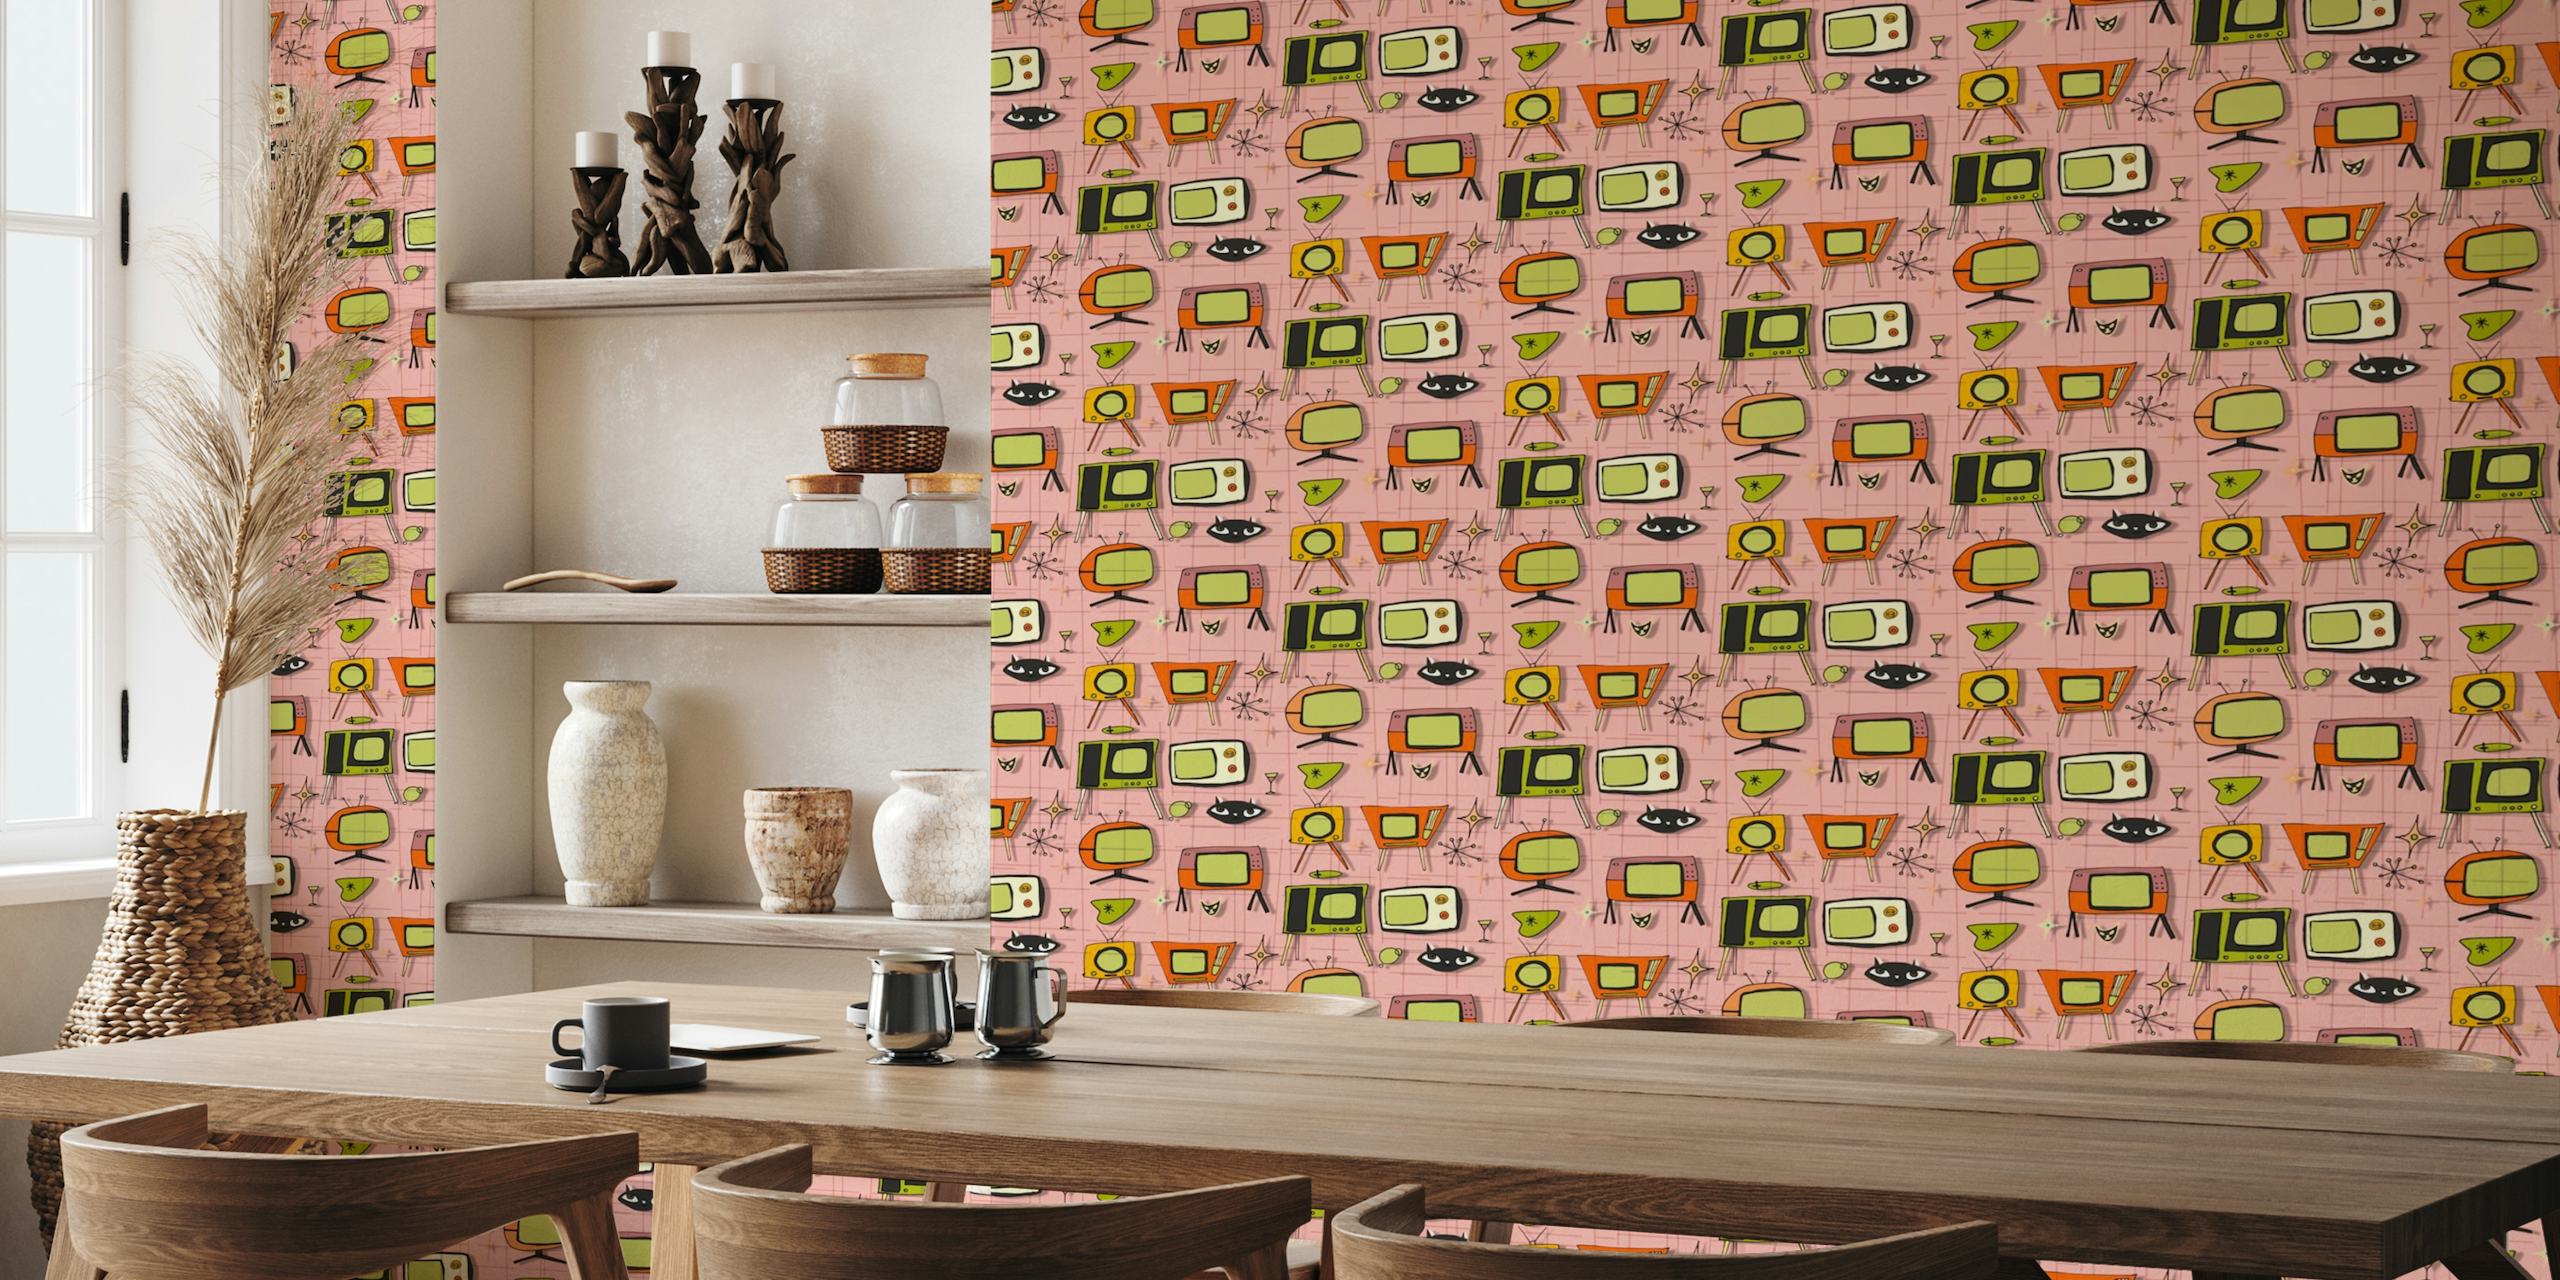 Vintage televisions pattern on pink background wall mural